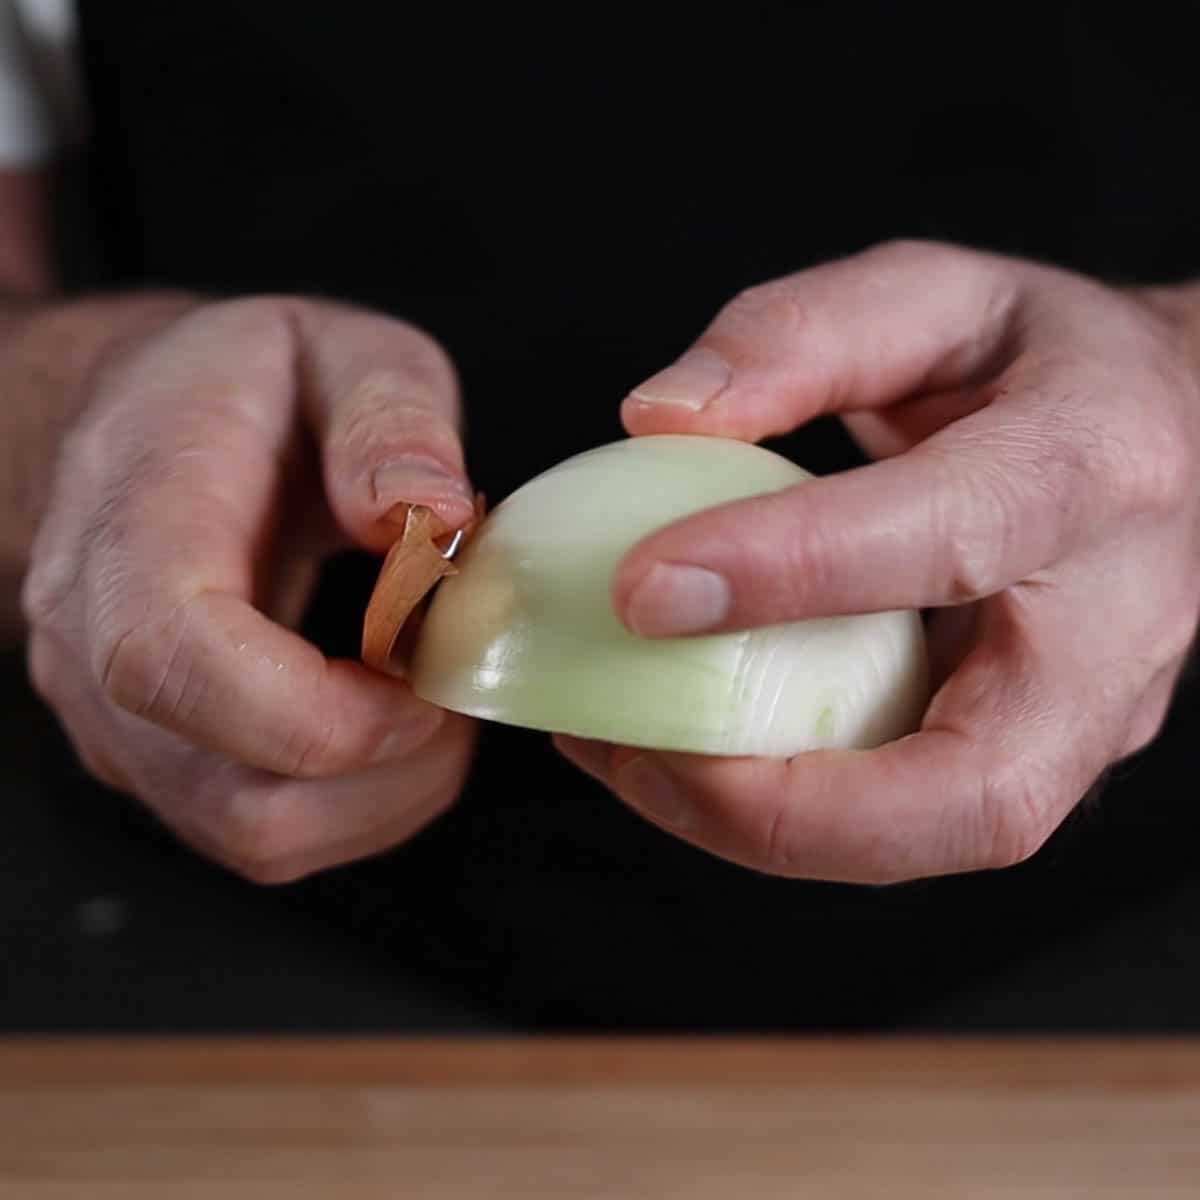 Man hands holding a peeled onion